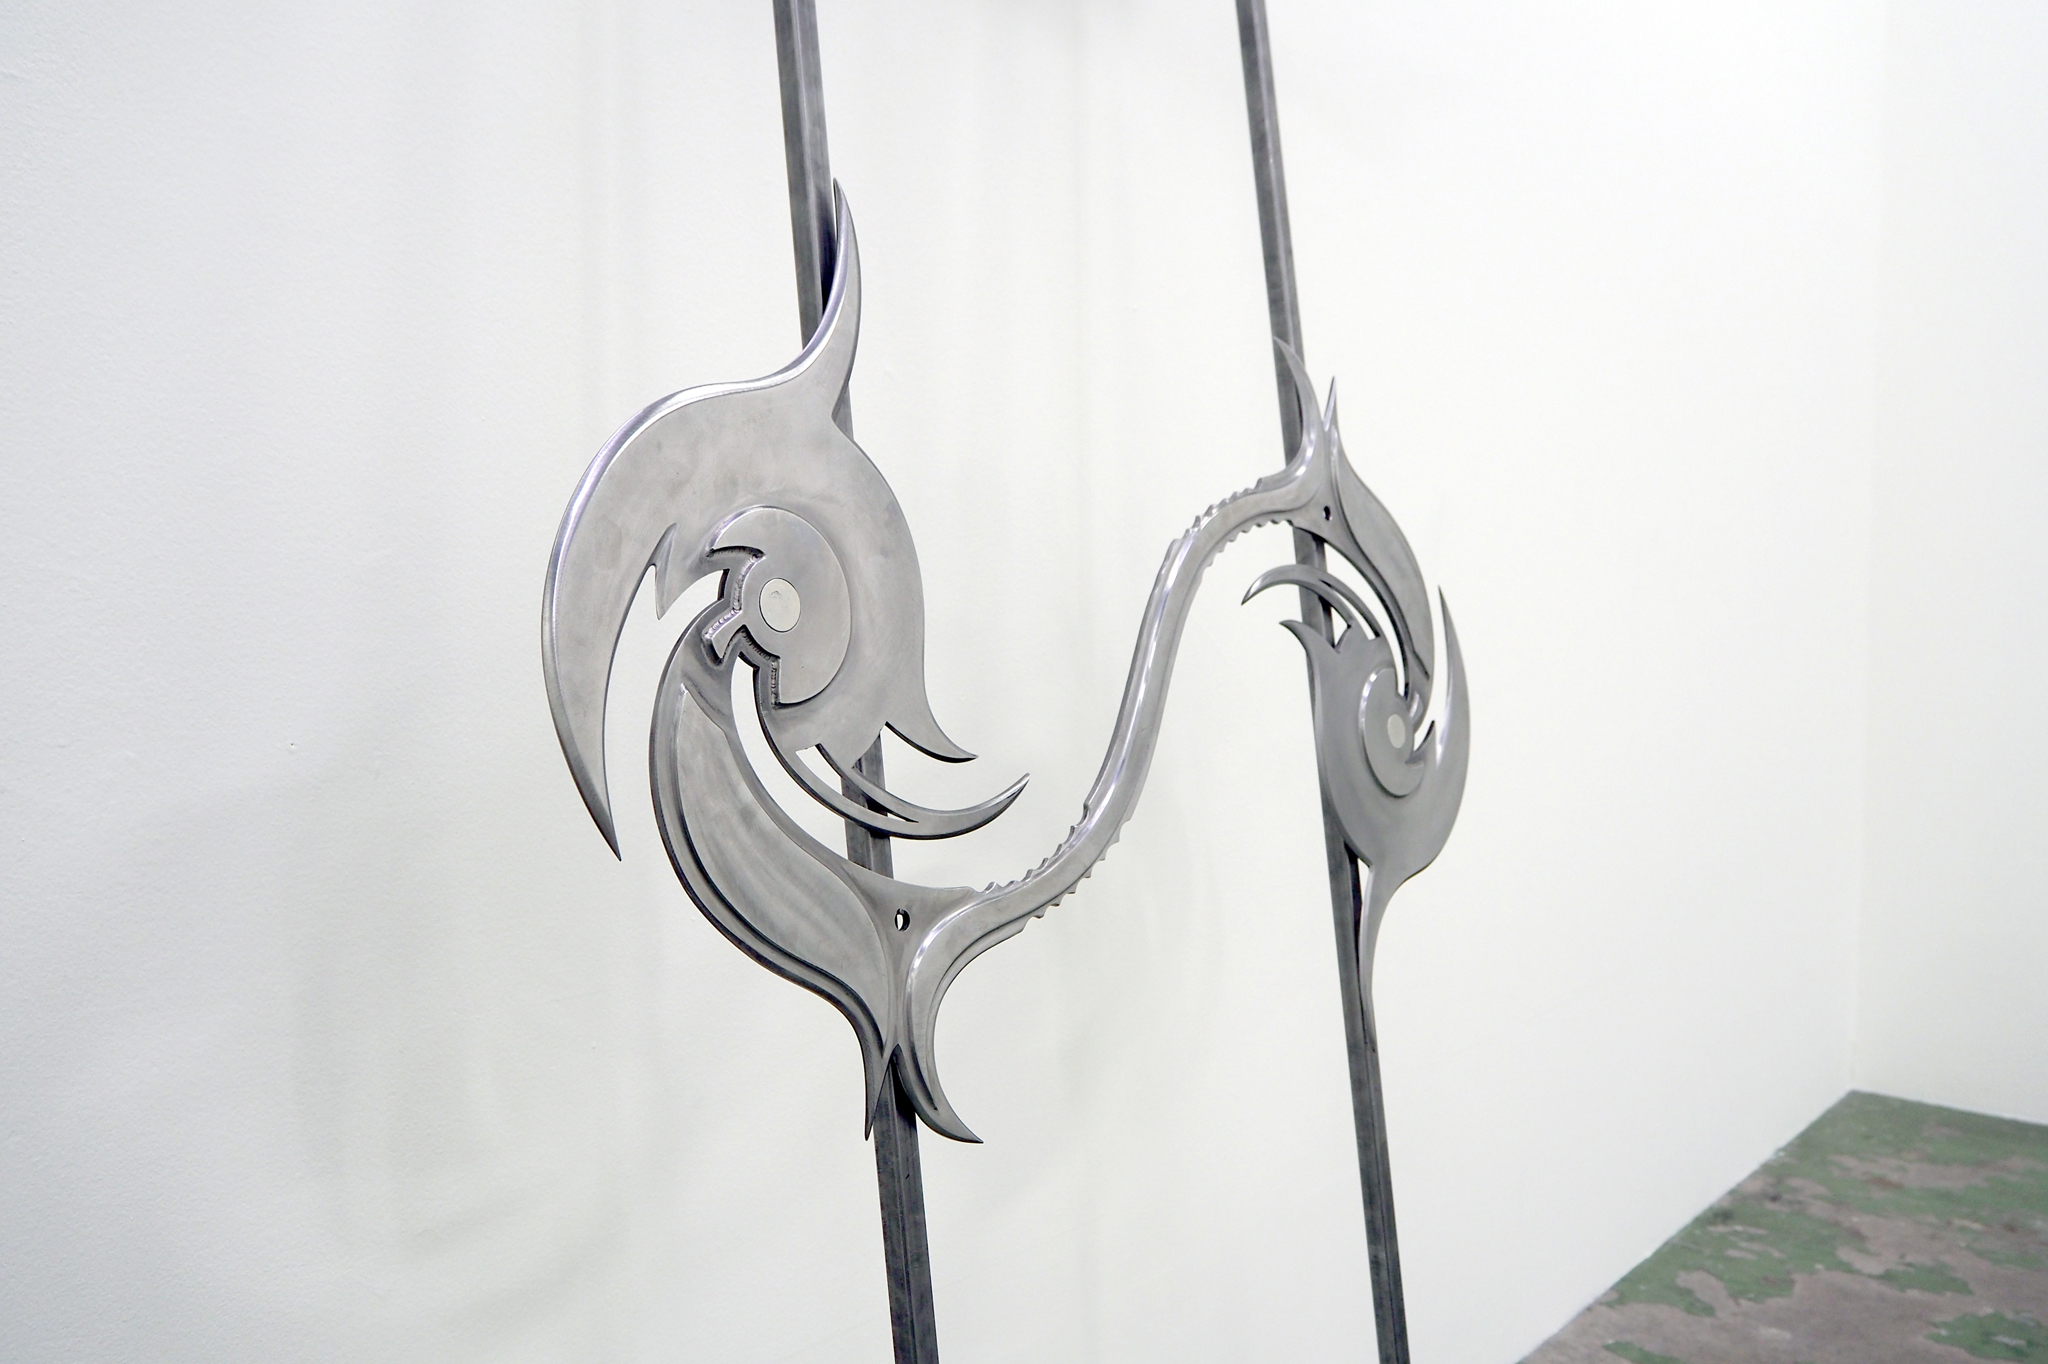 'Pose #9.3', steel, tin/antimony, 63 x 96cm, 9kg, 2022 (Collaboration with Iwan Boverhof)